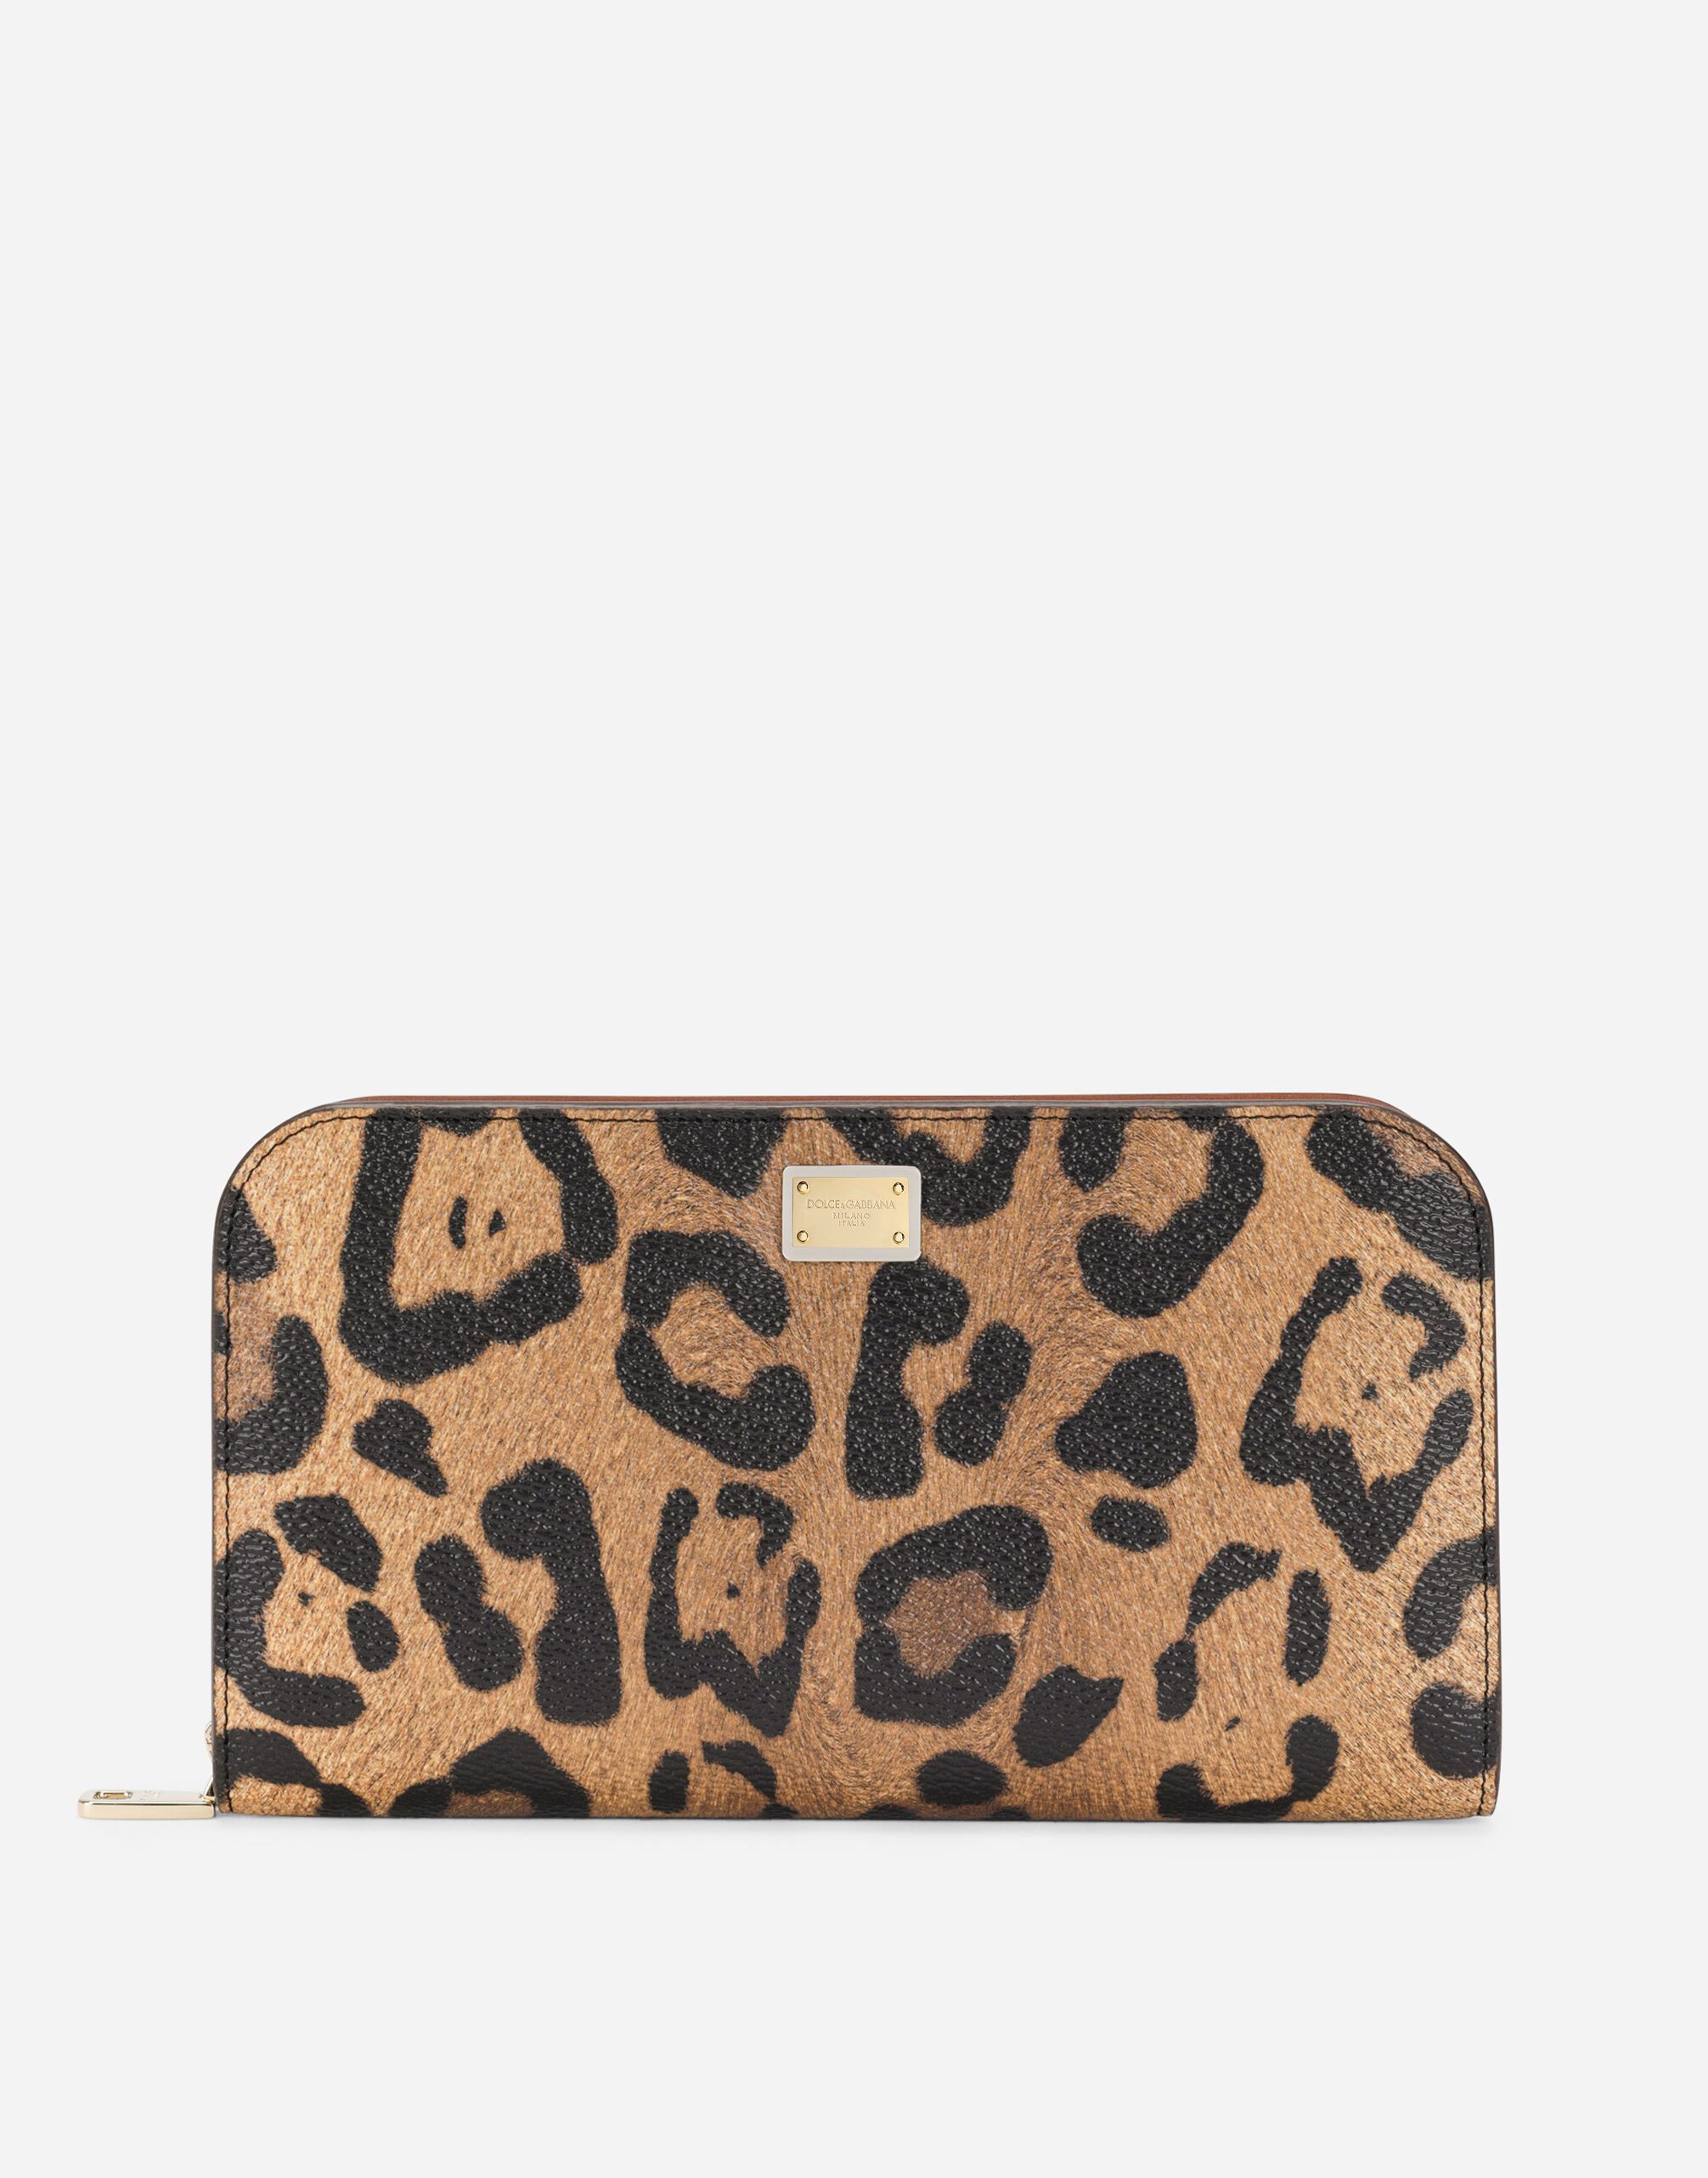 Dolce & Gabbana Leopard-print Crespo zip-around wallet with branded plate Multicolor BB2206AW384